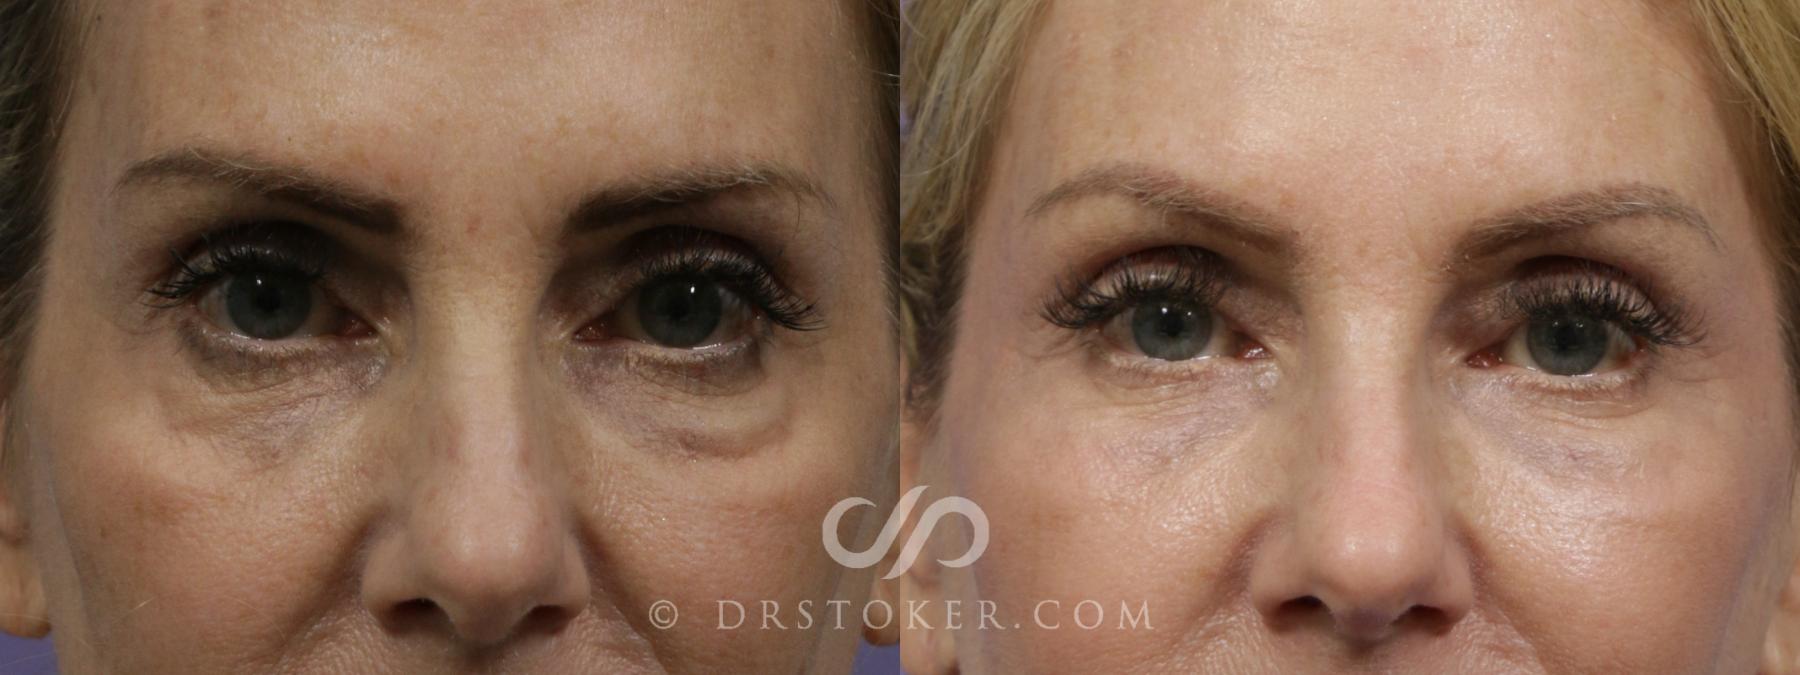 Before & After Undereye Fillers Case 1865 Front View in Los Angeles, CA